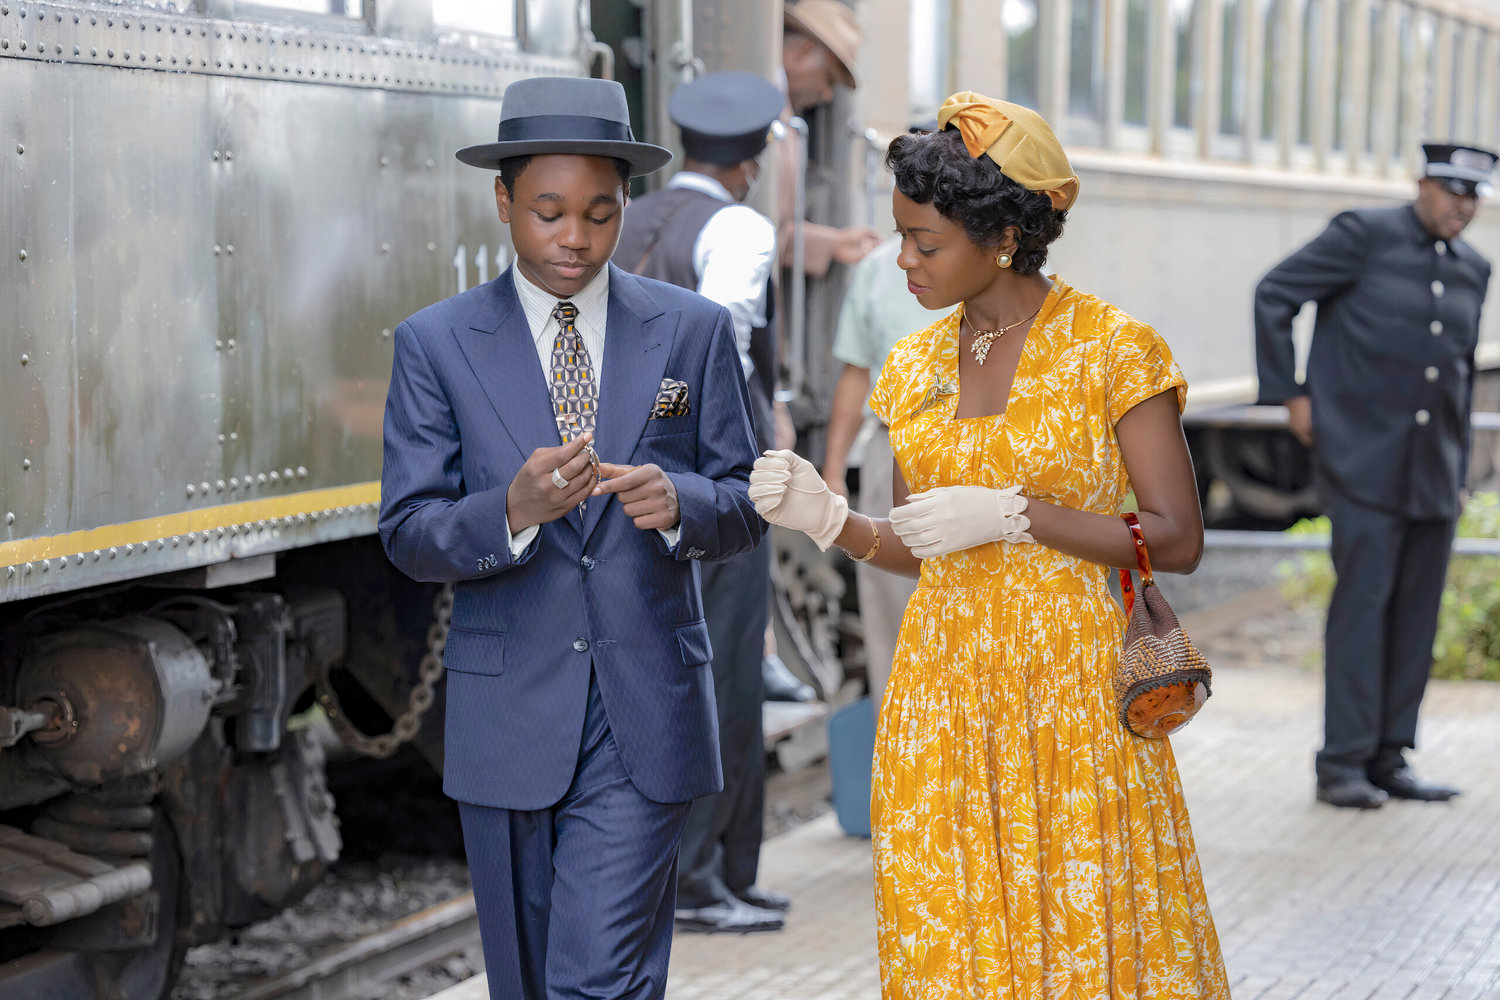 From left, Jalyn Hall as Emmett Till and Danielle Deadwyler as Mamie Till Bradley in “Till,” directed by Chinonye Chukwu, released by Orion Pictures.